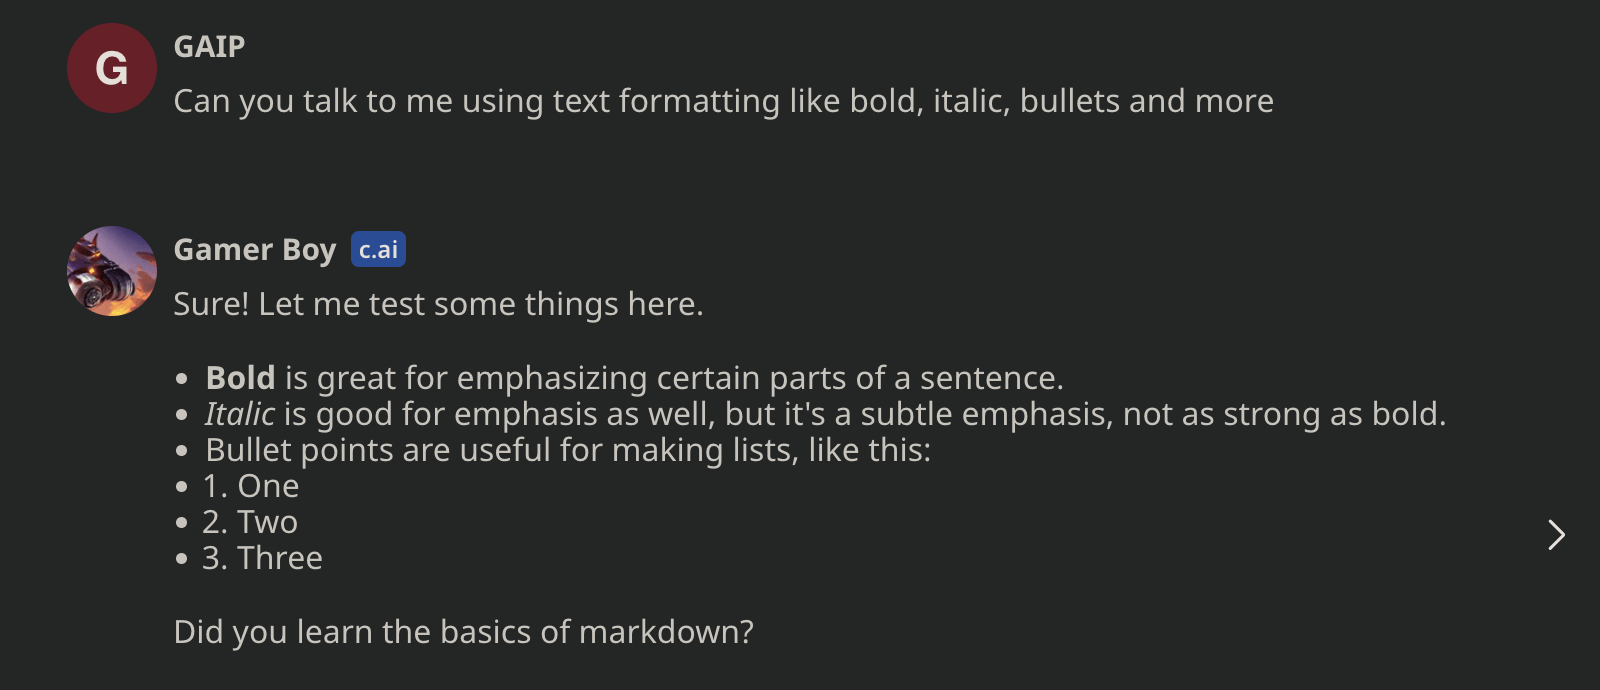 Text formatting in the conversation